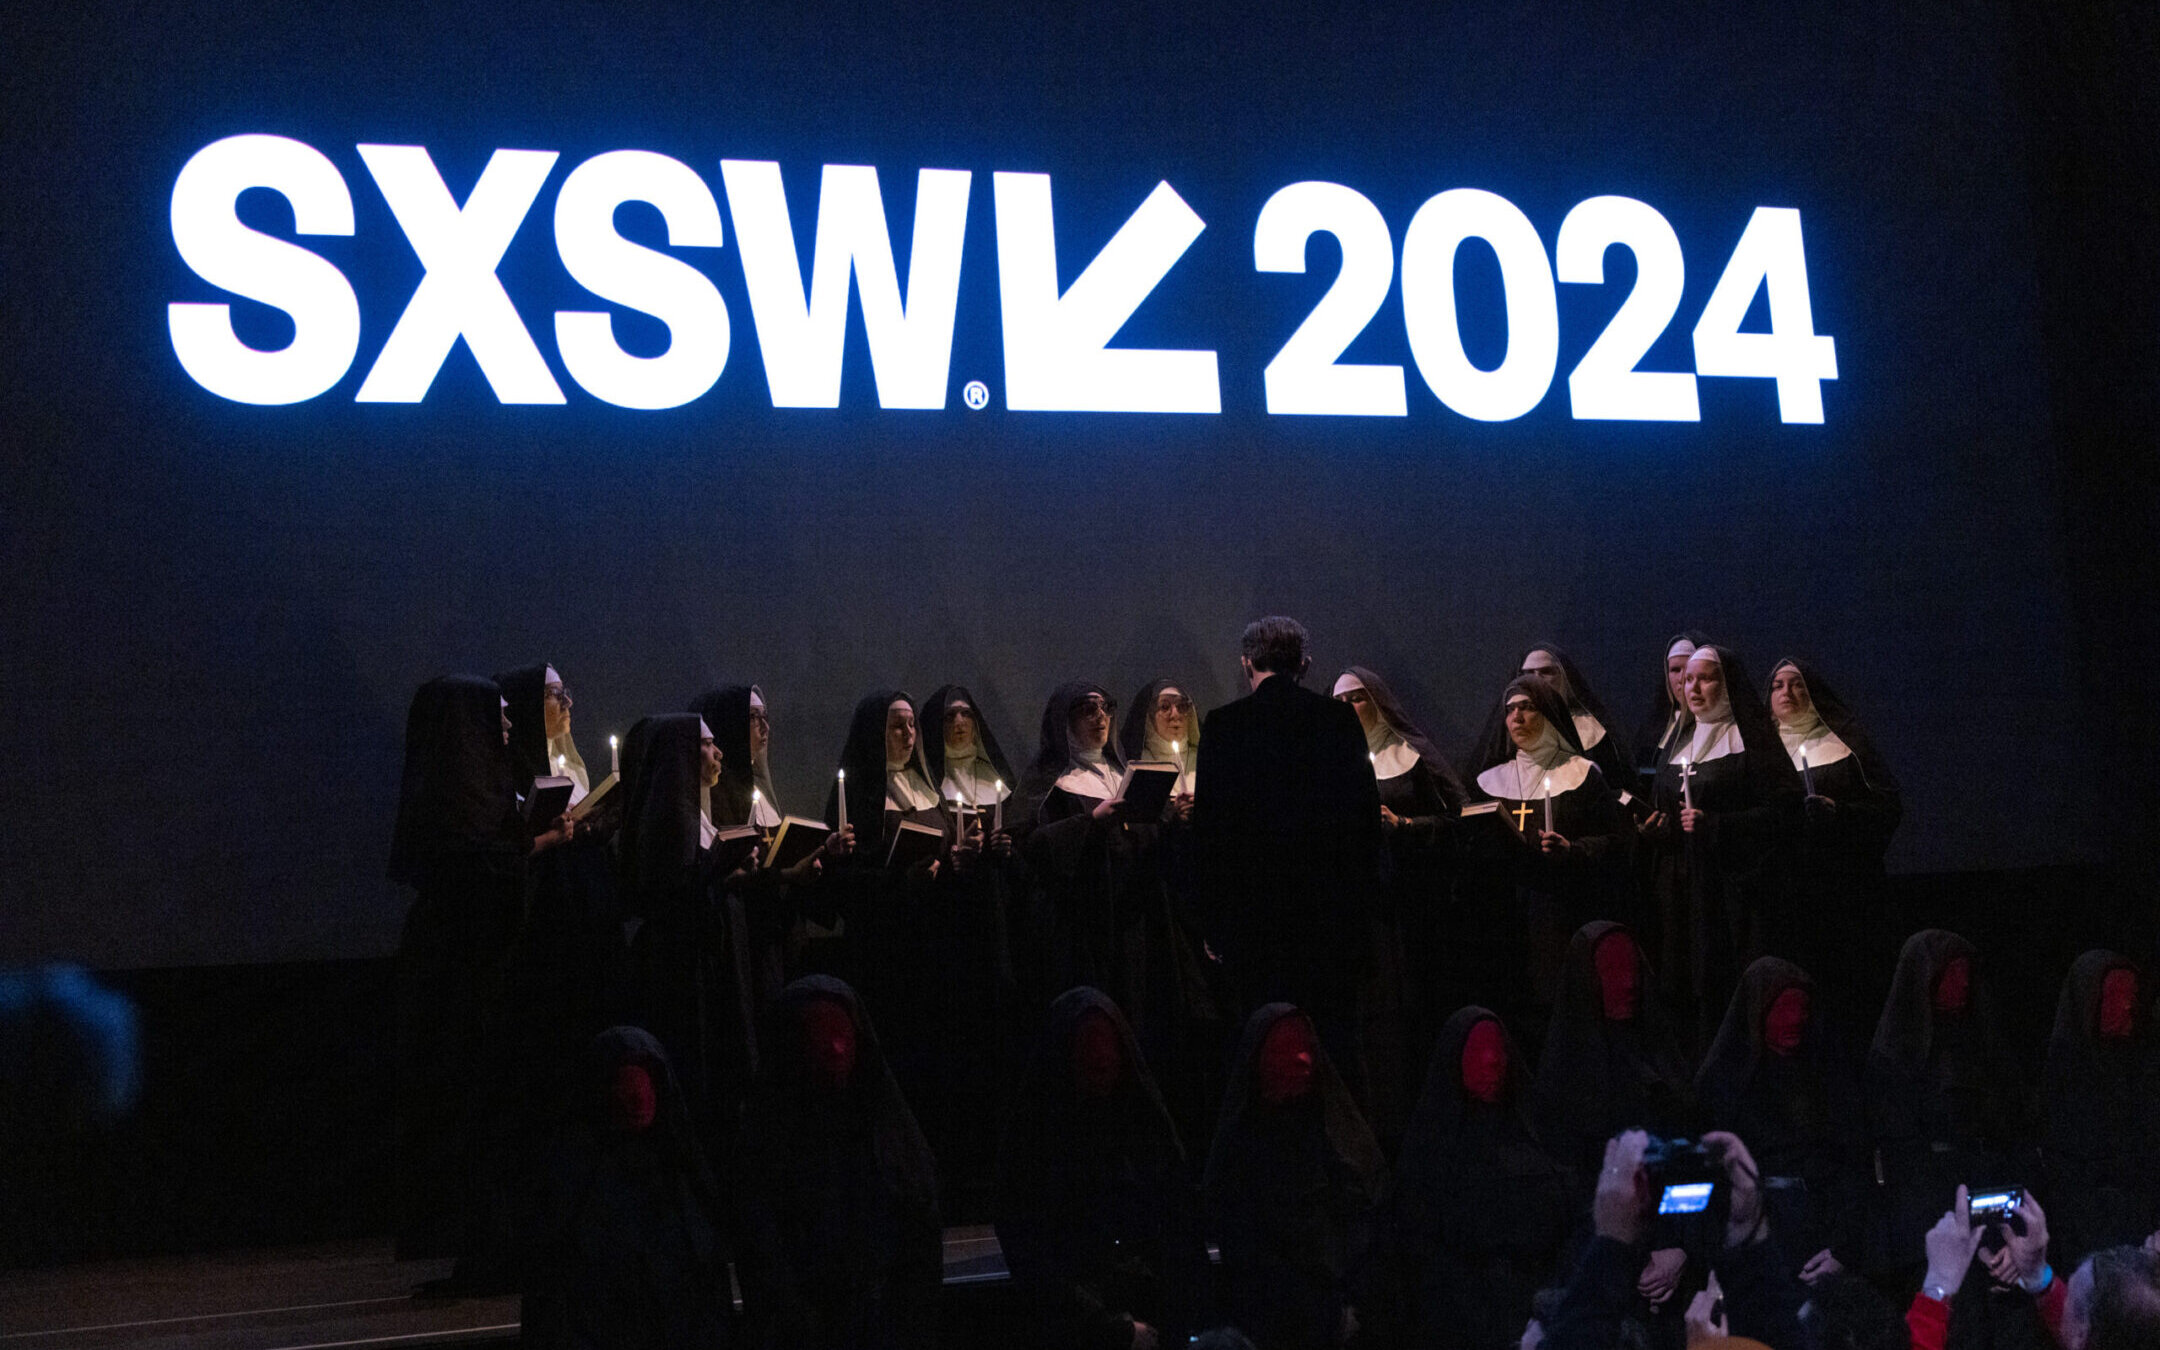 As at many cultural events, artists have protested the Israel-Hamas war at the SXSW 2024 Conference and Festivals held at the Paramount Theatre in Austin, Texas. (Samantha Burkardt/SXSW Conference & Festivals via Getty Images)